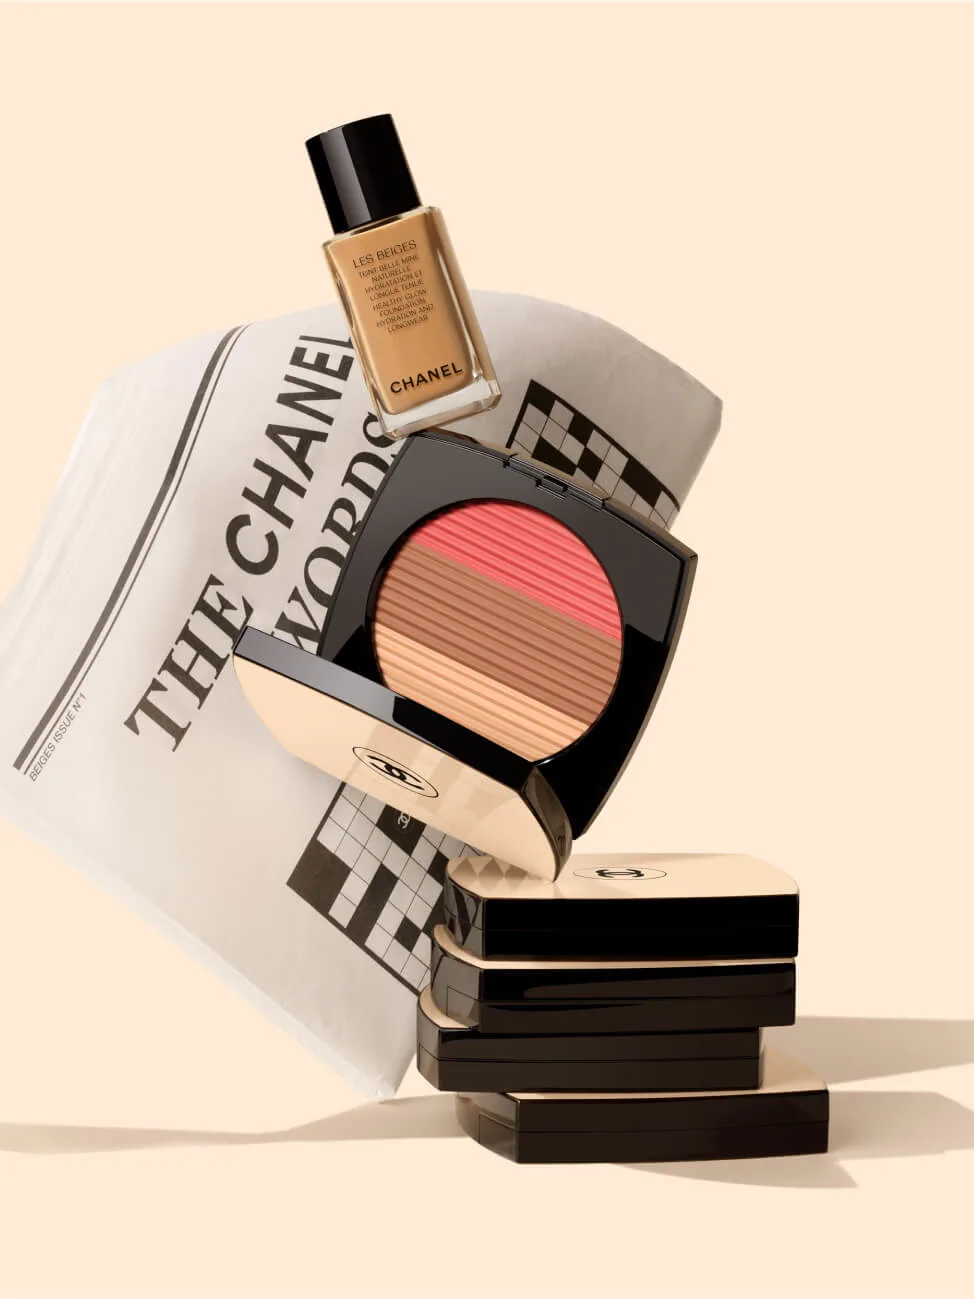 Chanel Les Beiges Healthy Glow Sun-Kissed Powders 